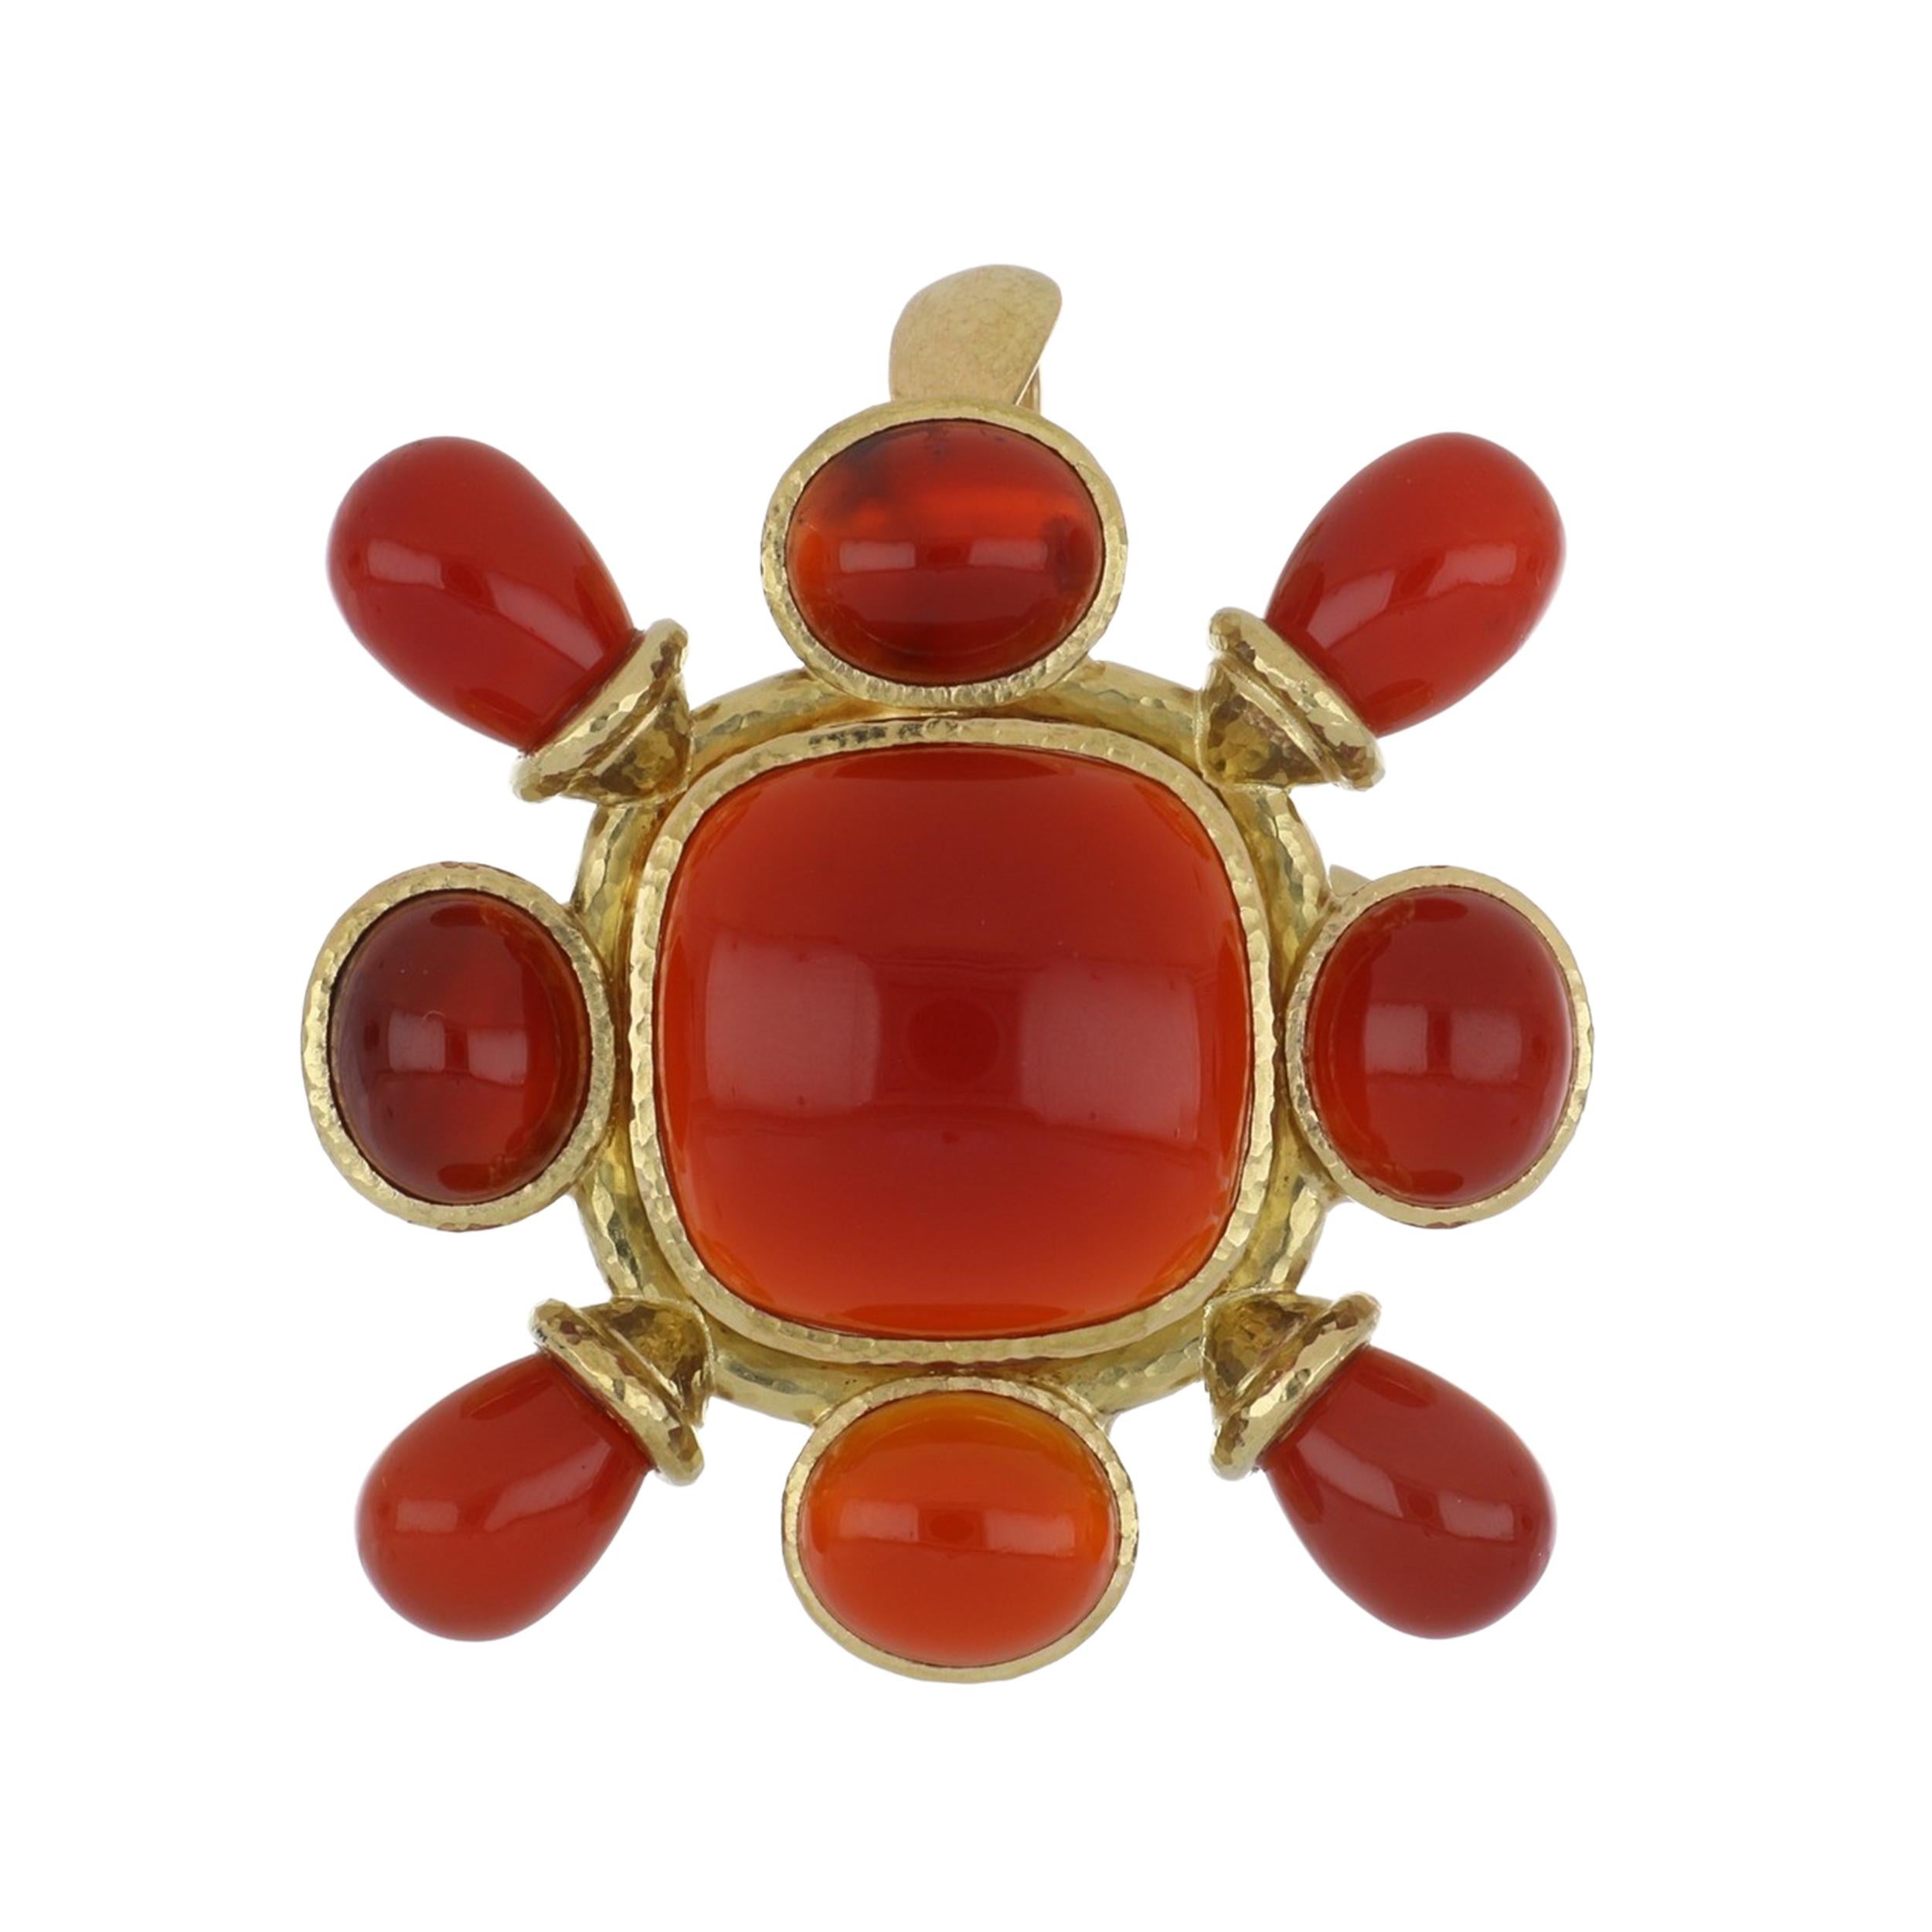 An estate Elizabeth Locke hammered 19K yellow gold cabochon carnelian brooch measuring 1.75 inches x 1.75 inches. This piece has a removable hammered 18K yellow gold open/close bail so it can also be worn as a pendant. Circa 2000.  